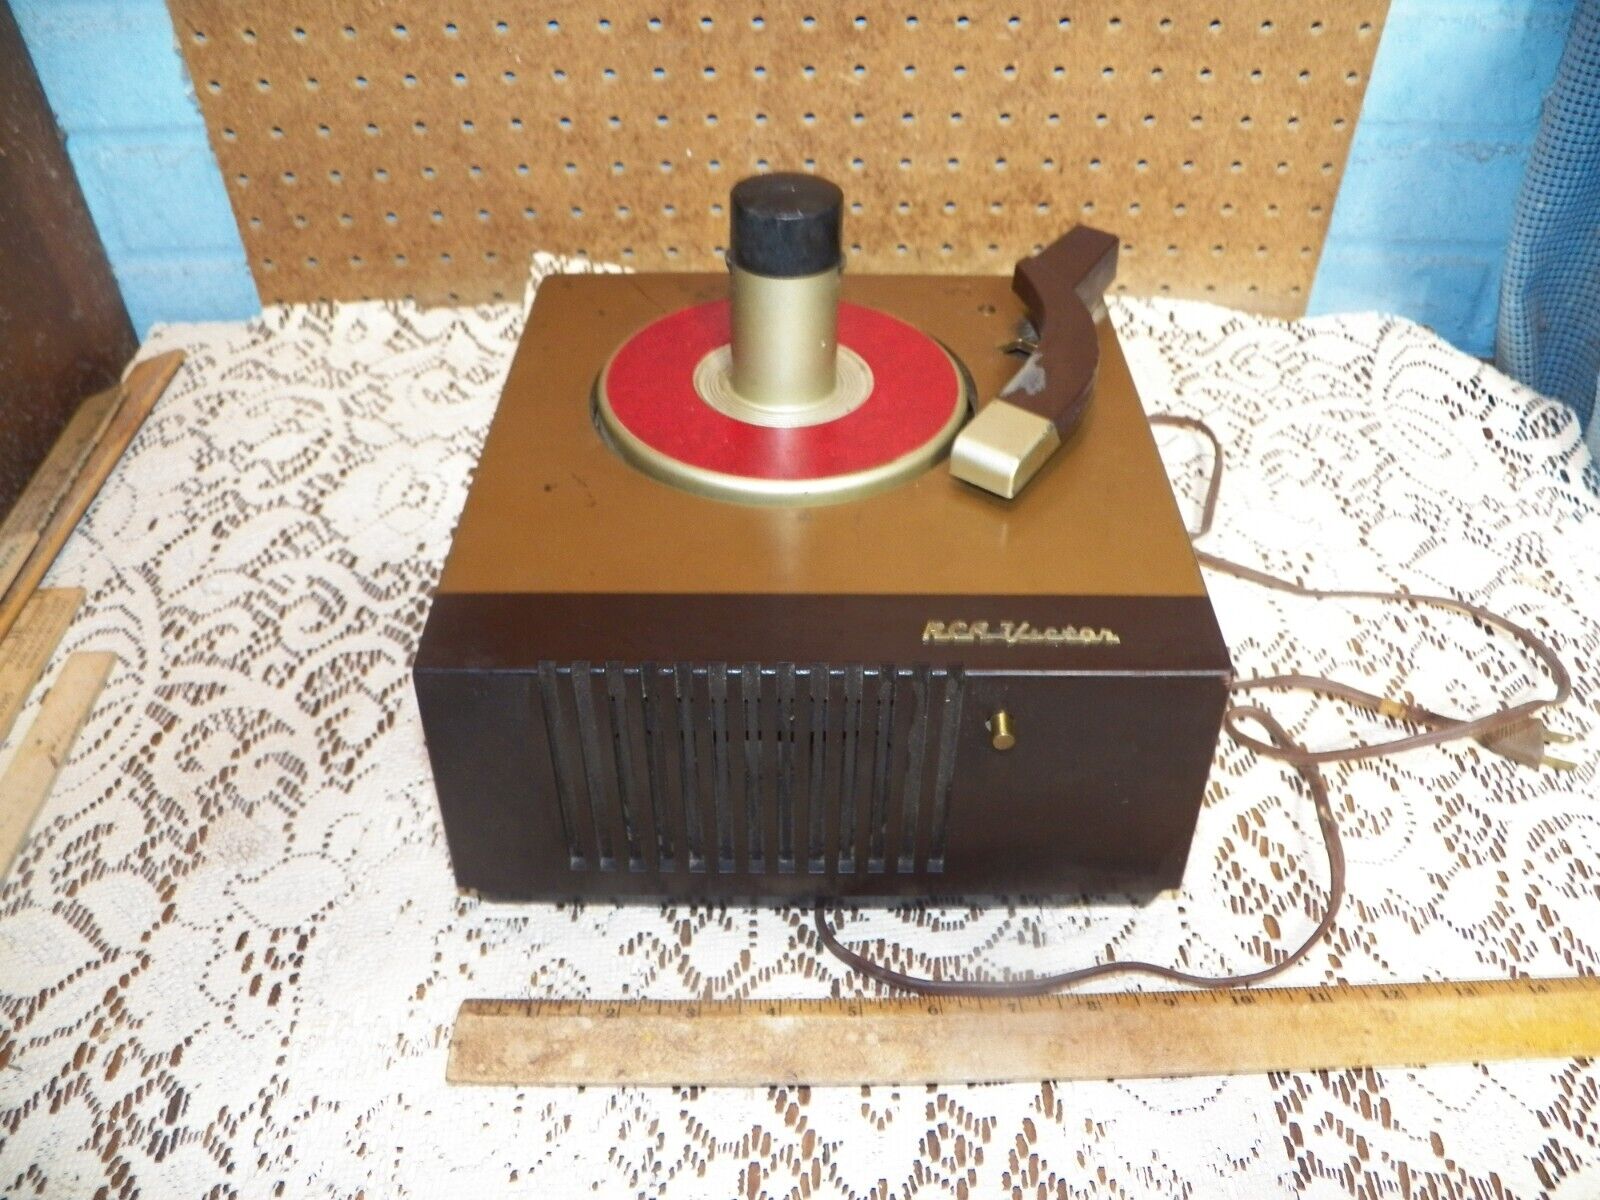 1950 RCA VICTOR 45-EY 45 RPM Record Player w/ Bakelite Case - AS IS For Parts